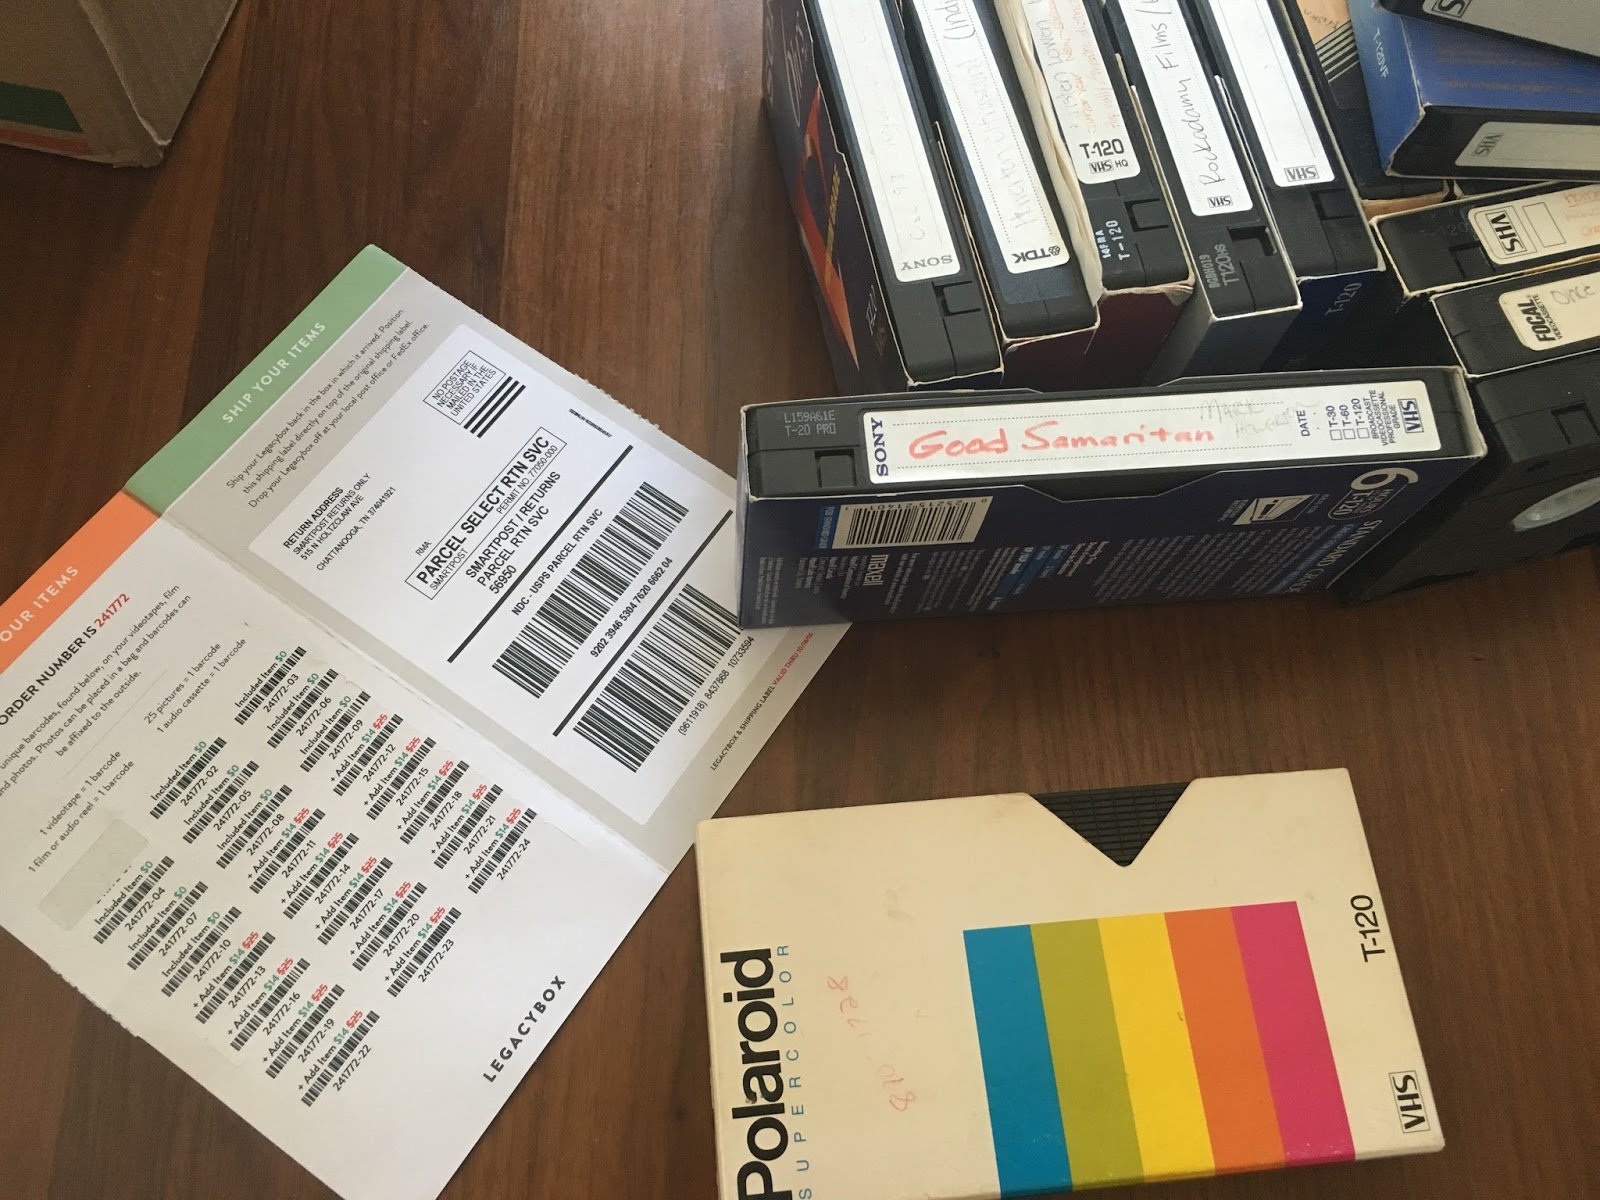 Who Invented the VHS Tape? – Legacybox